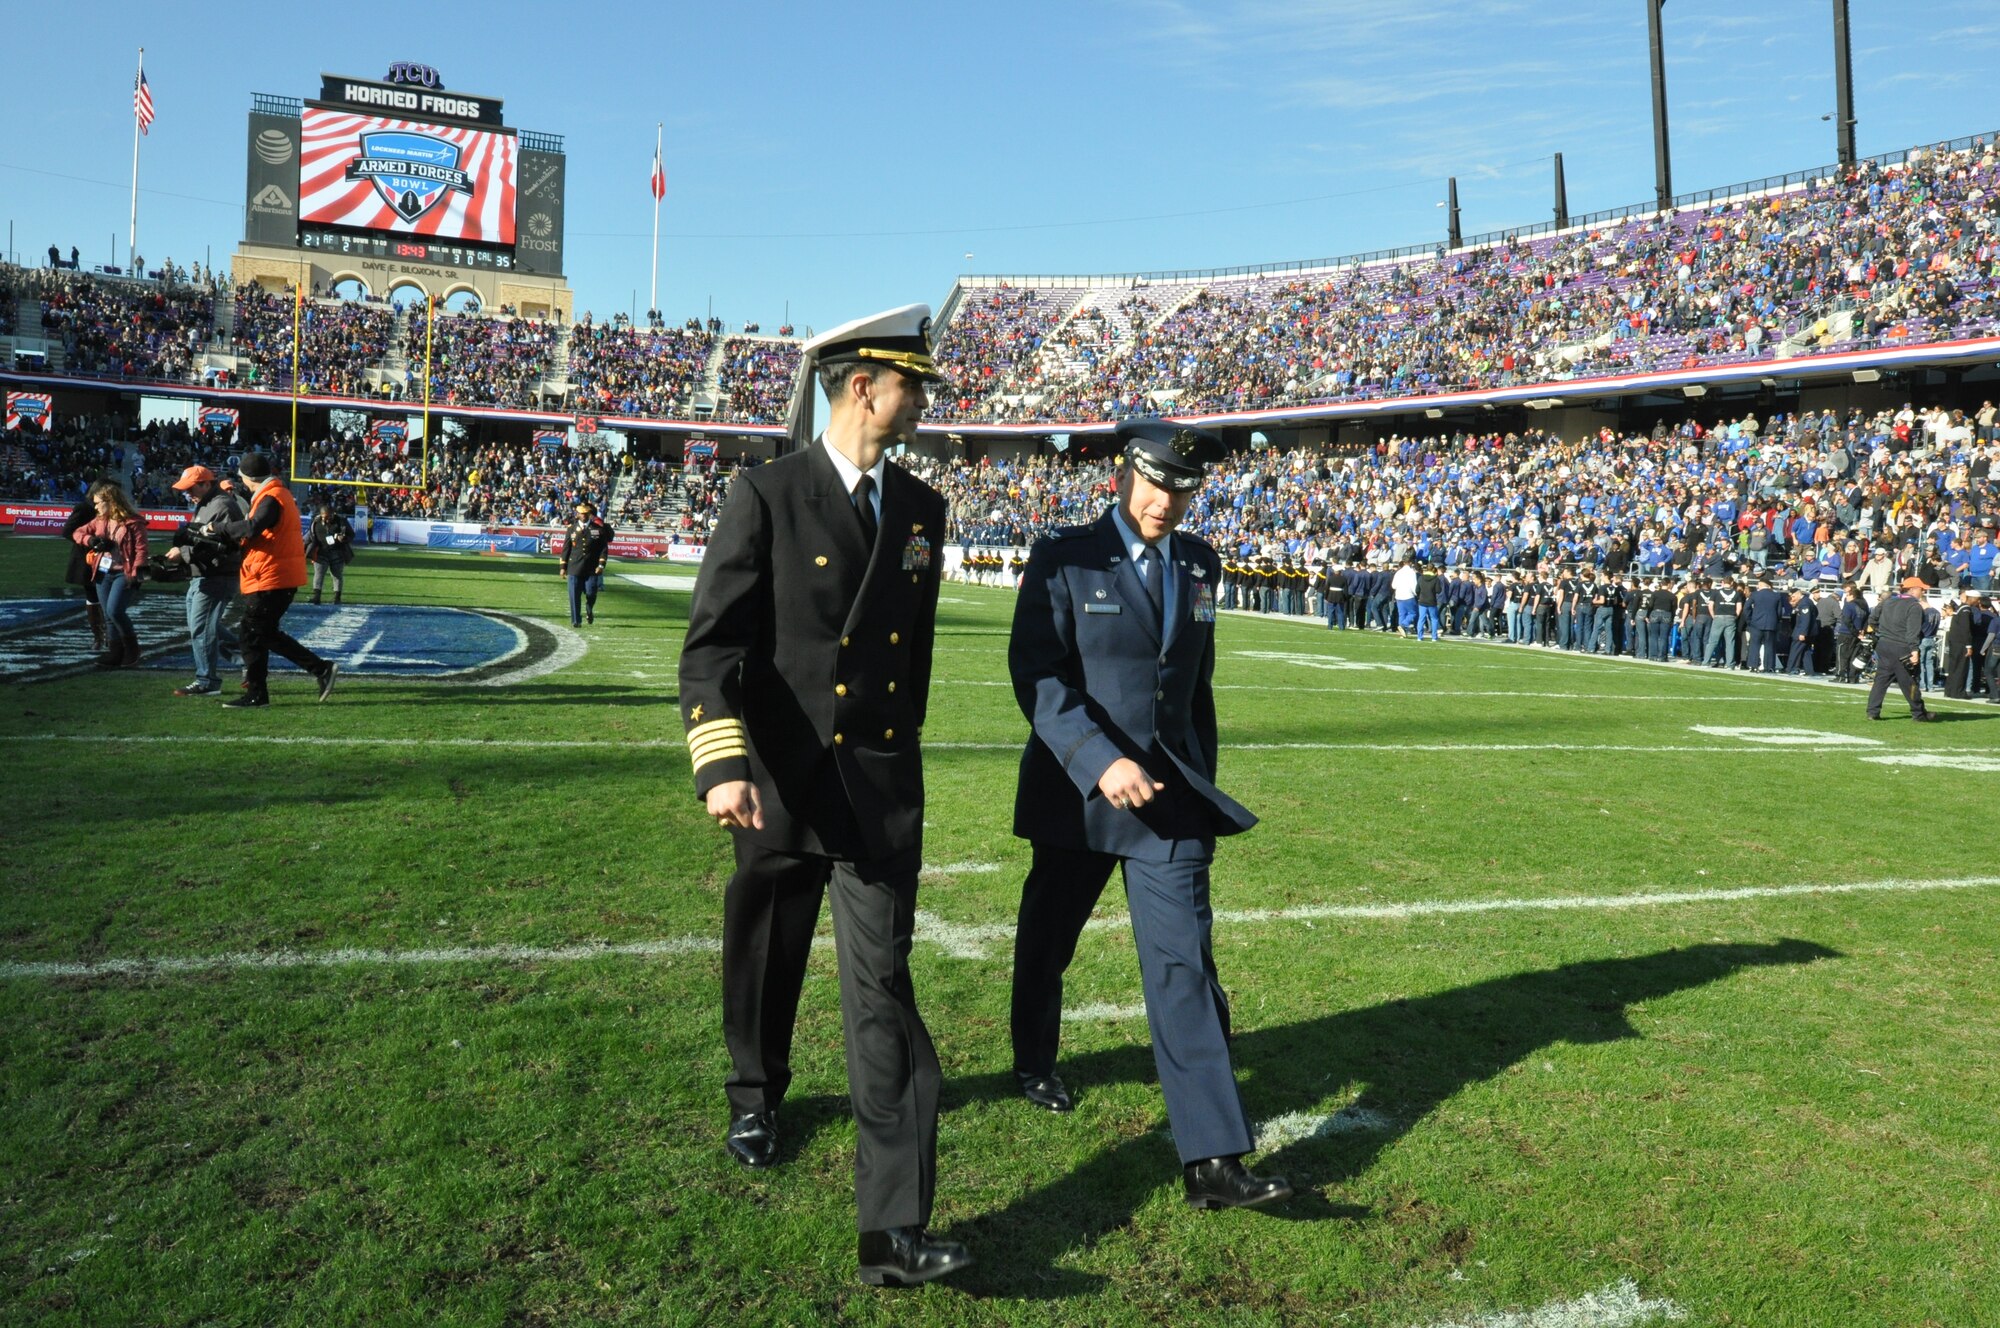 NAVAL AIR STATION FORT WORTH JOINT RESERVE BASE, Texas - Navy Capt. Mike Steffen, commanding officer of Naval Air Station Fort Worth Joint Reserve Base, and Air Force Col. John Breazeale, 301st Fighter Wing commander, walk across the field Dec. 29 after participating in a mass enlistment at the Lockheed Martin Armed Forces Bowl at Amon G. Carter stadium, Fort Worth, Texas. During the game the U.S. Air Force Academy and the University of California battled for the championship, but in the end the Bears beat the Falcons 55 to 36. (U.S. Air Force photo by Master Sgt. Julie Briden-Garcia)